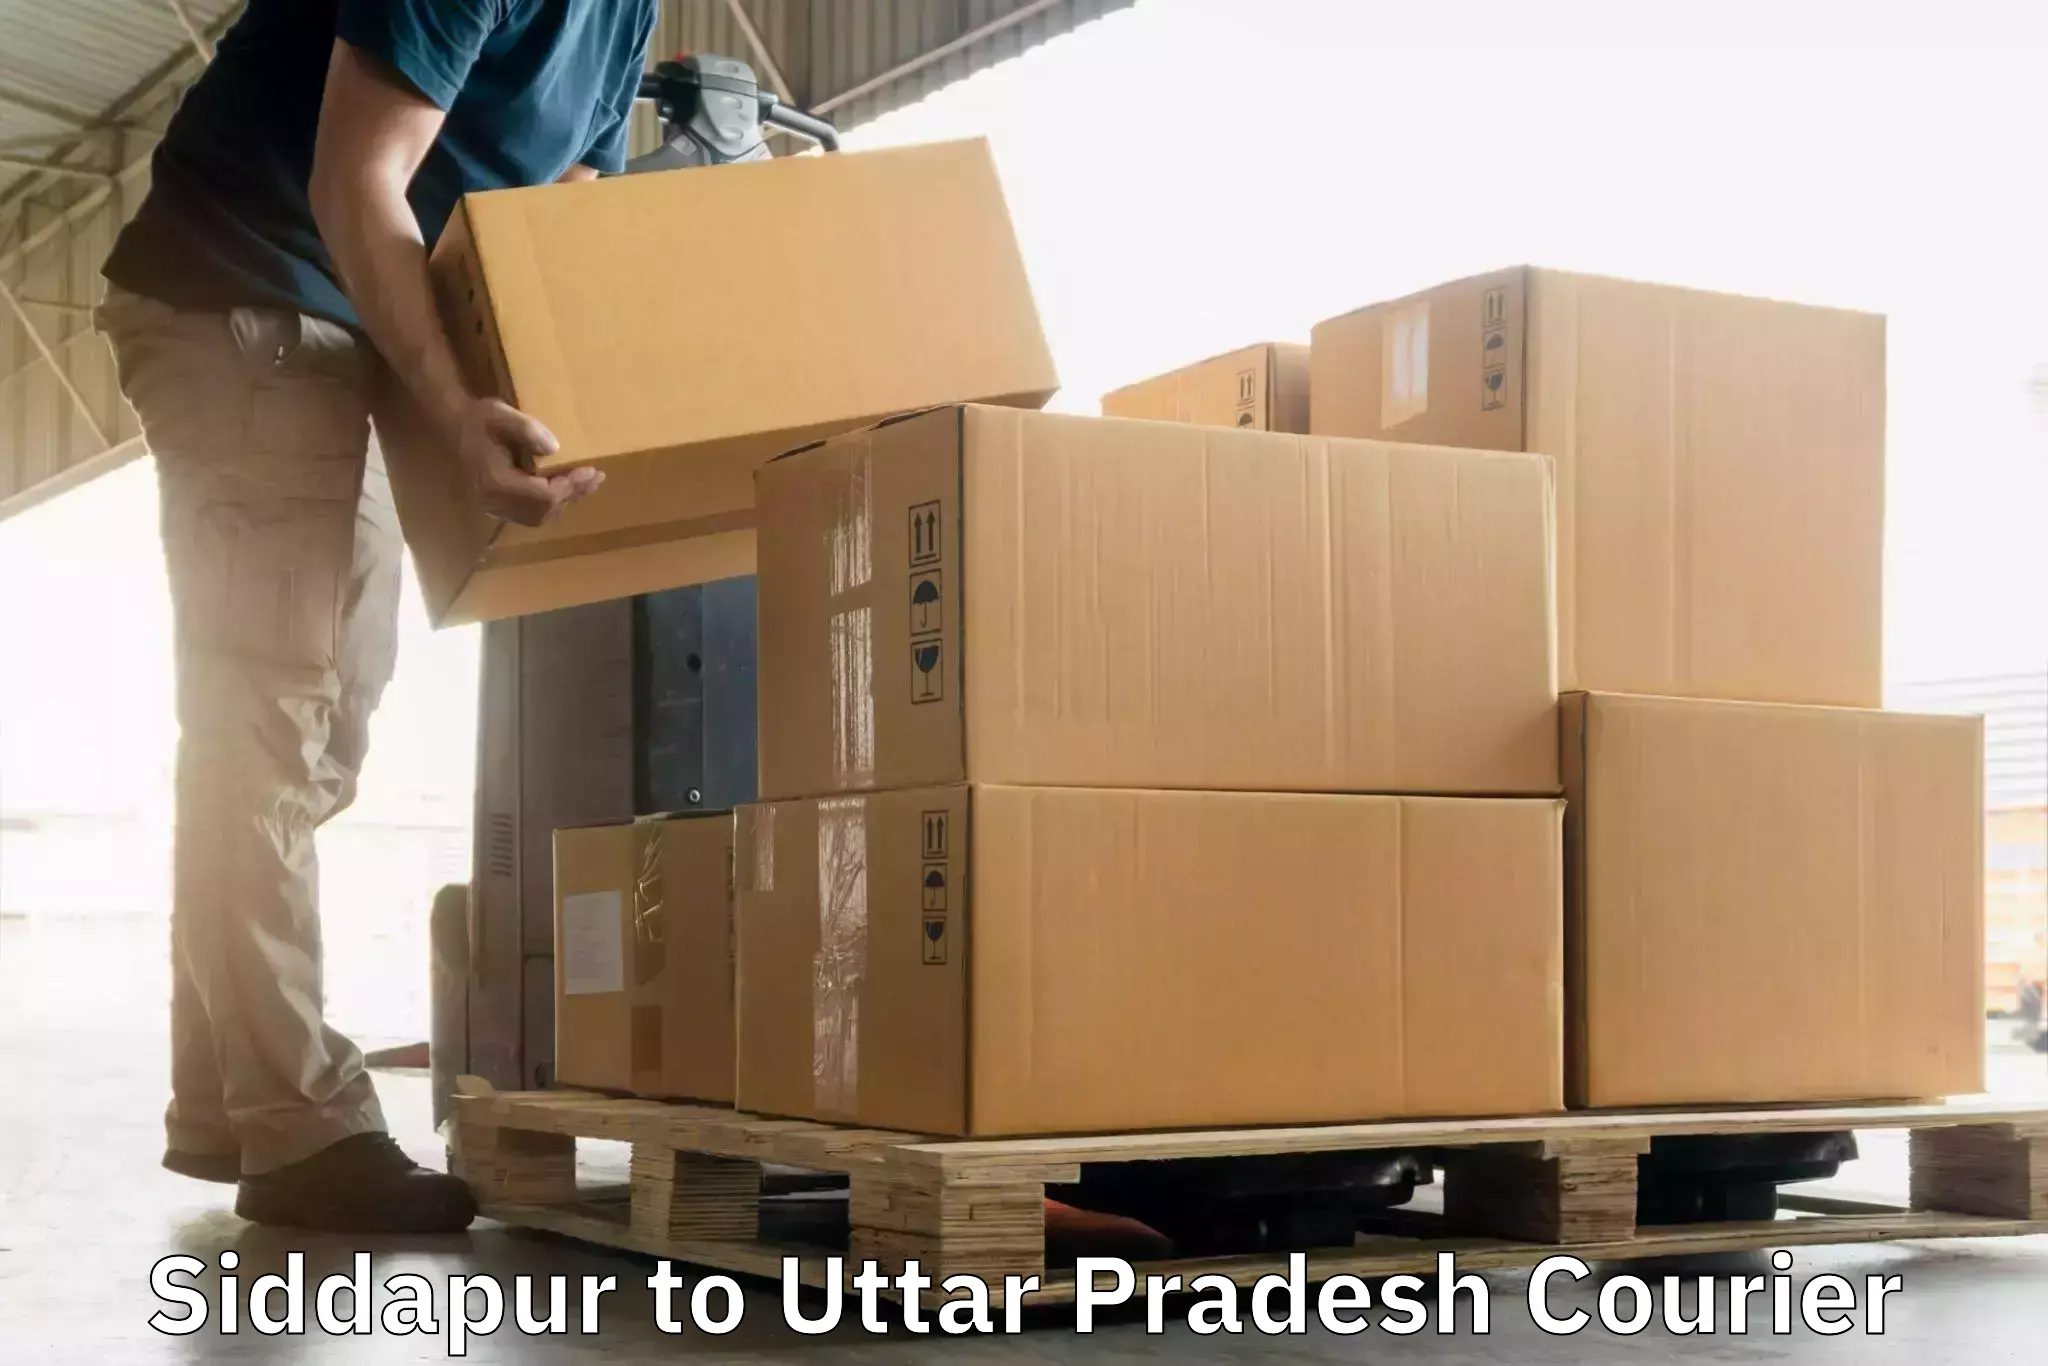 Parcel service for businesses Siddapur to Agra